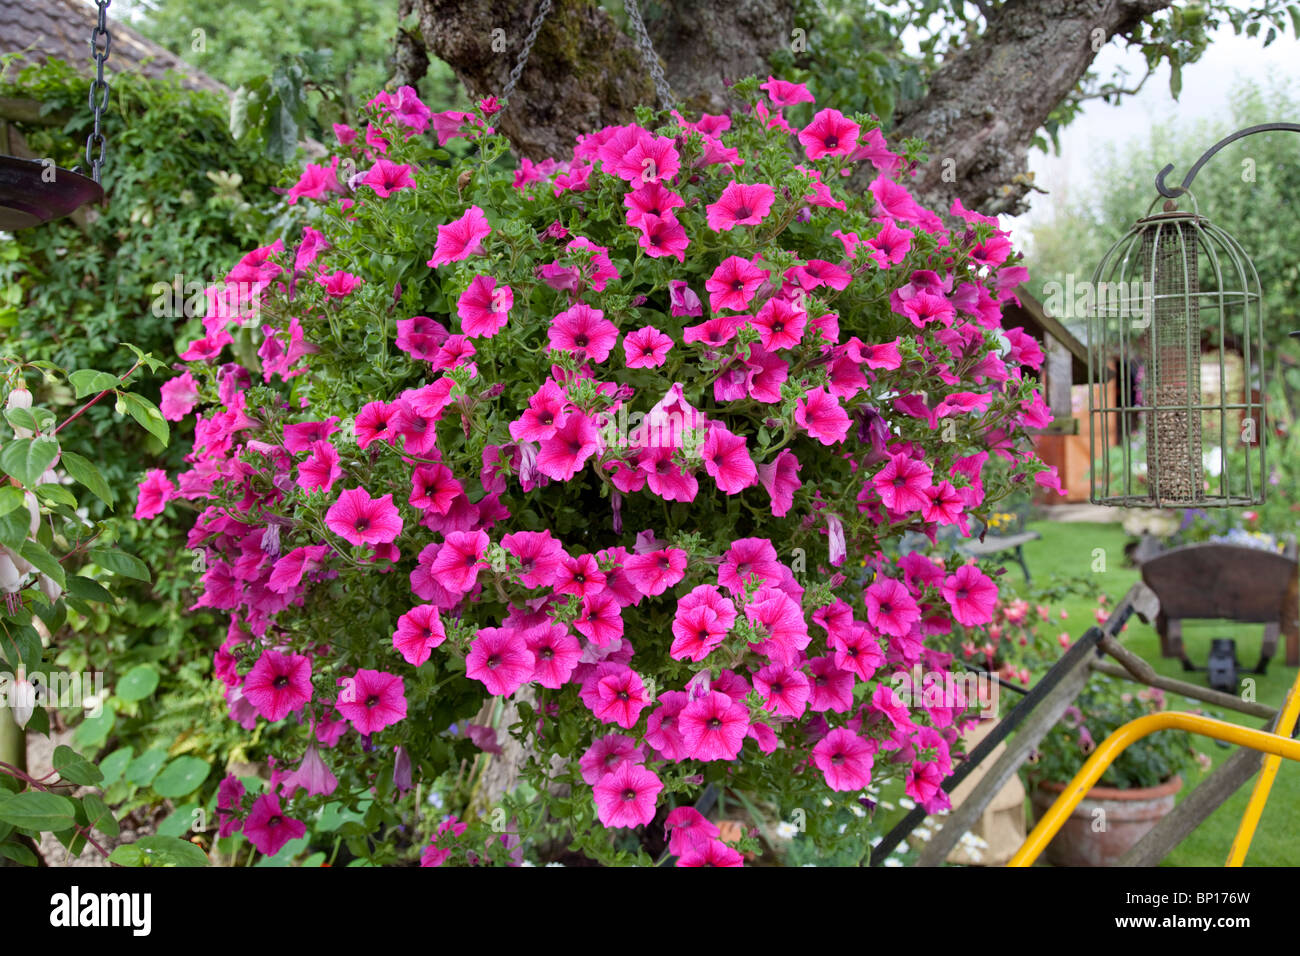 Colourful display of Petunias in garden of small bungalow Cheltenham UK Stock Photo